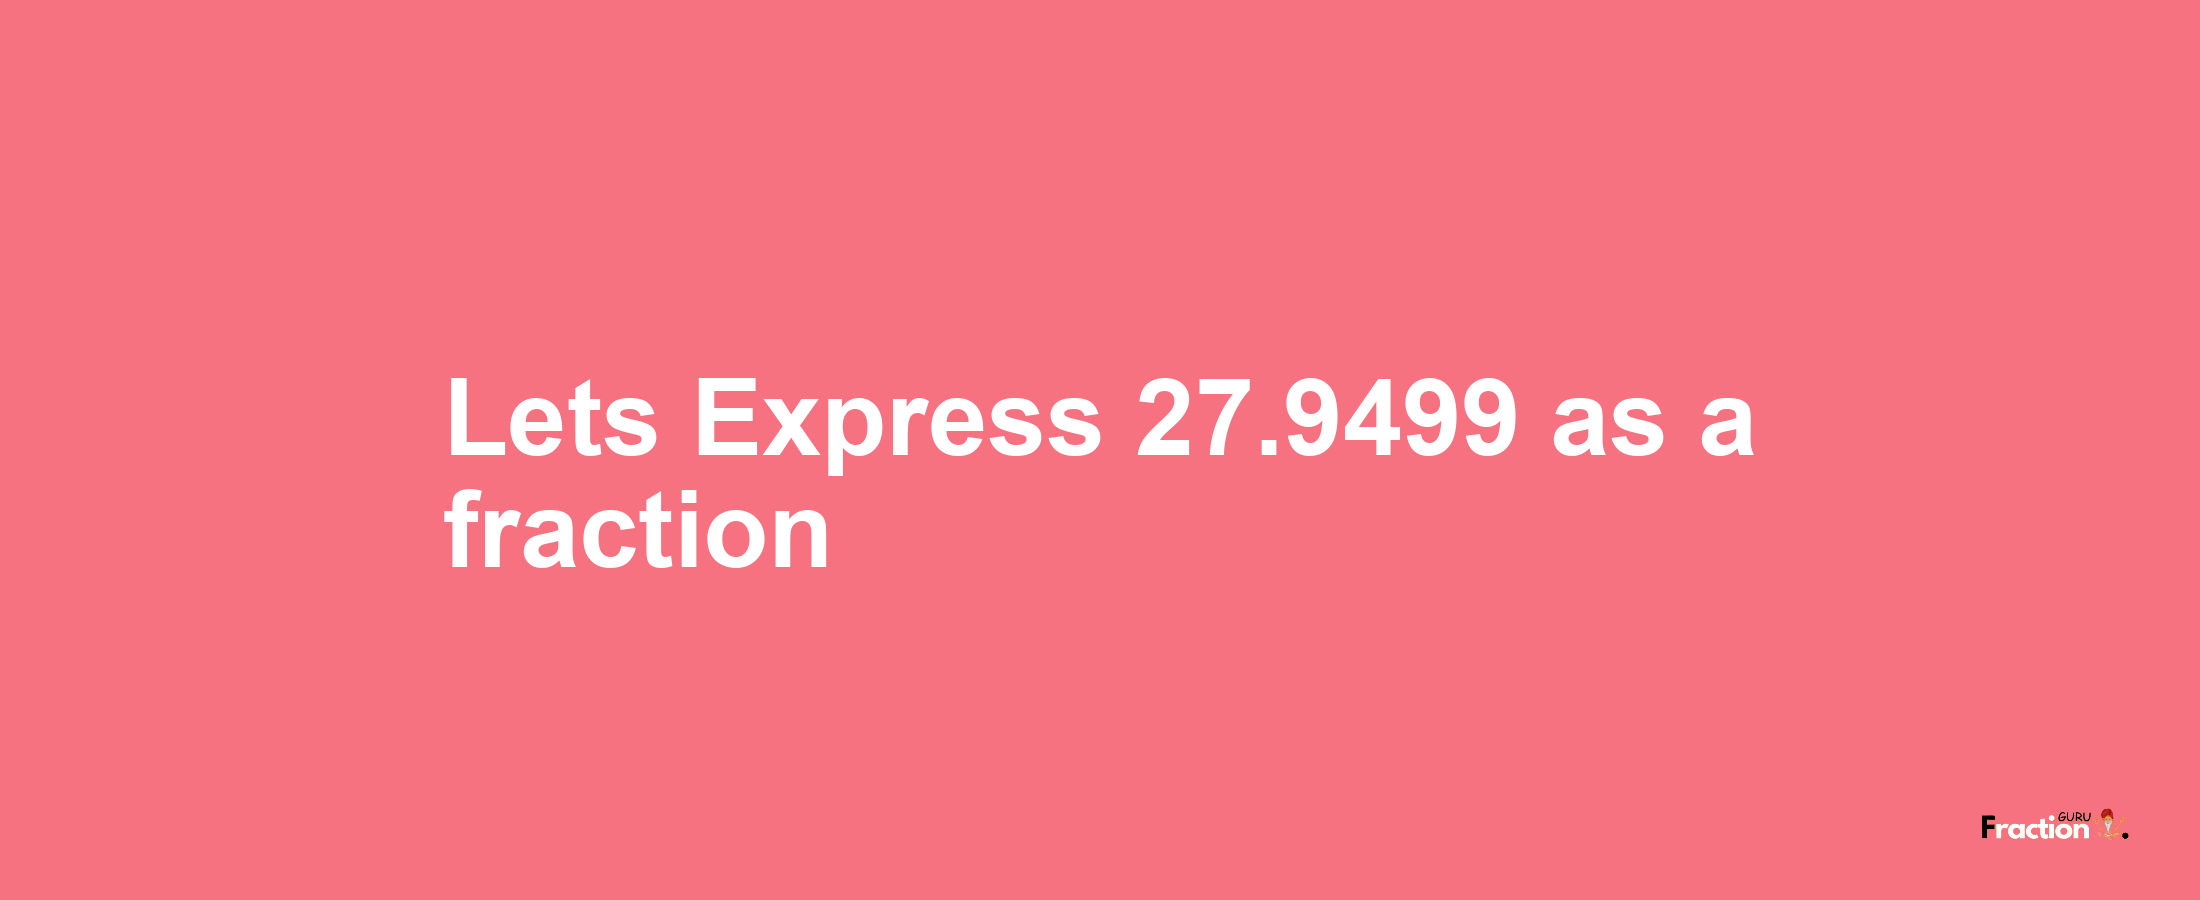 Lets Express 27.9499 as afraction